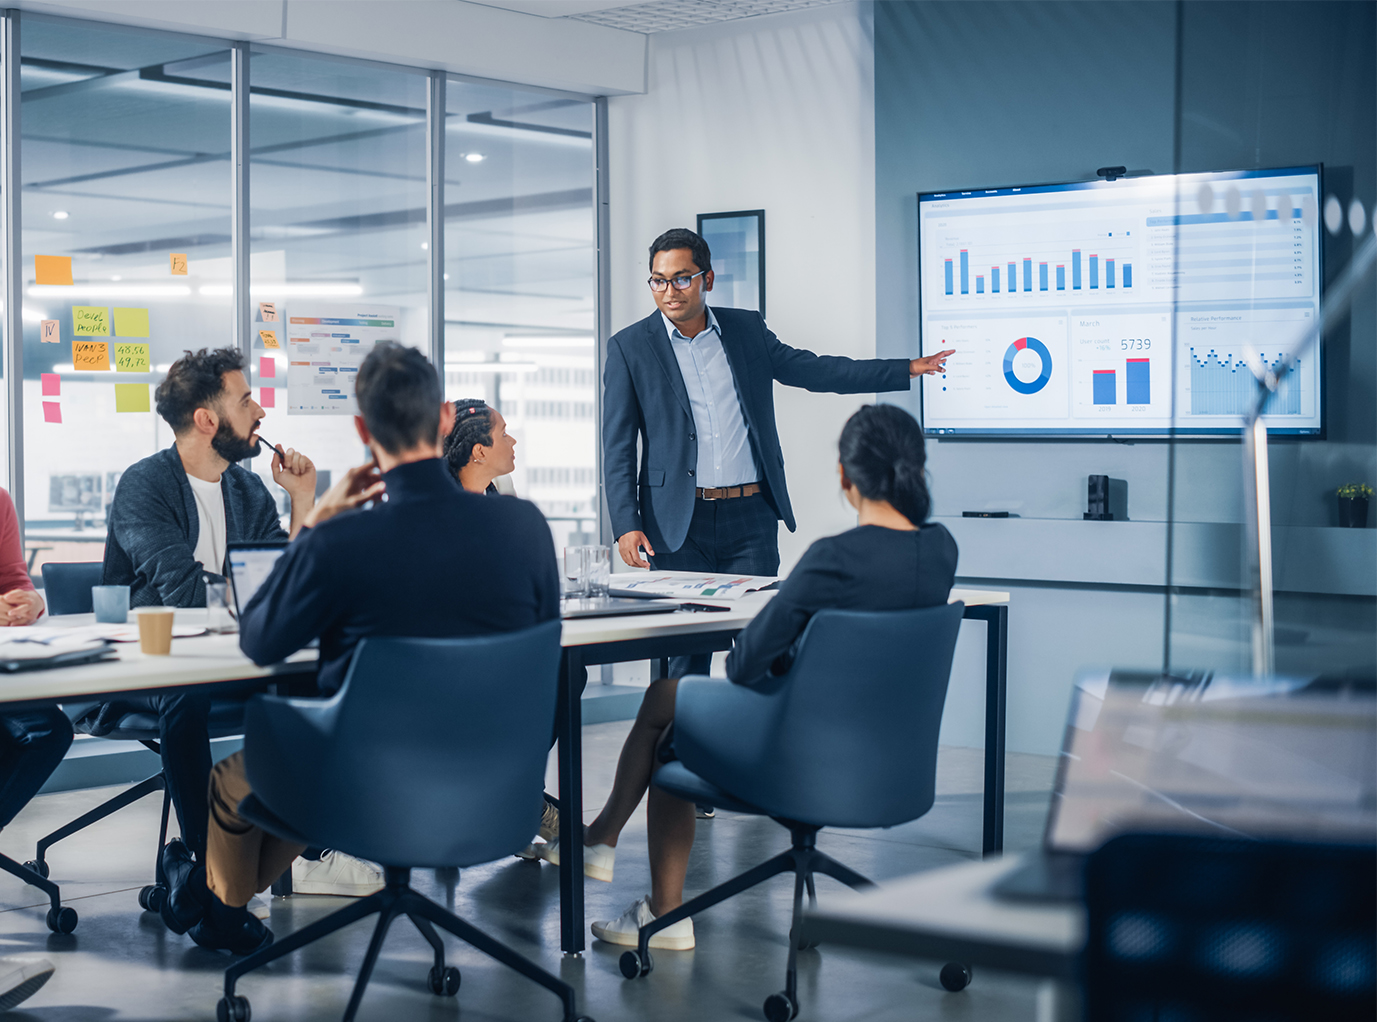 An executive displays dealership profitability and operational metrics to board members, showcasing Readywire’s impact on business transparency and success.